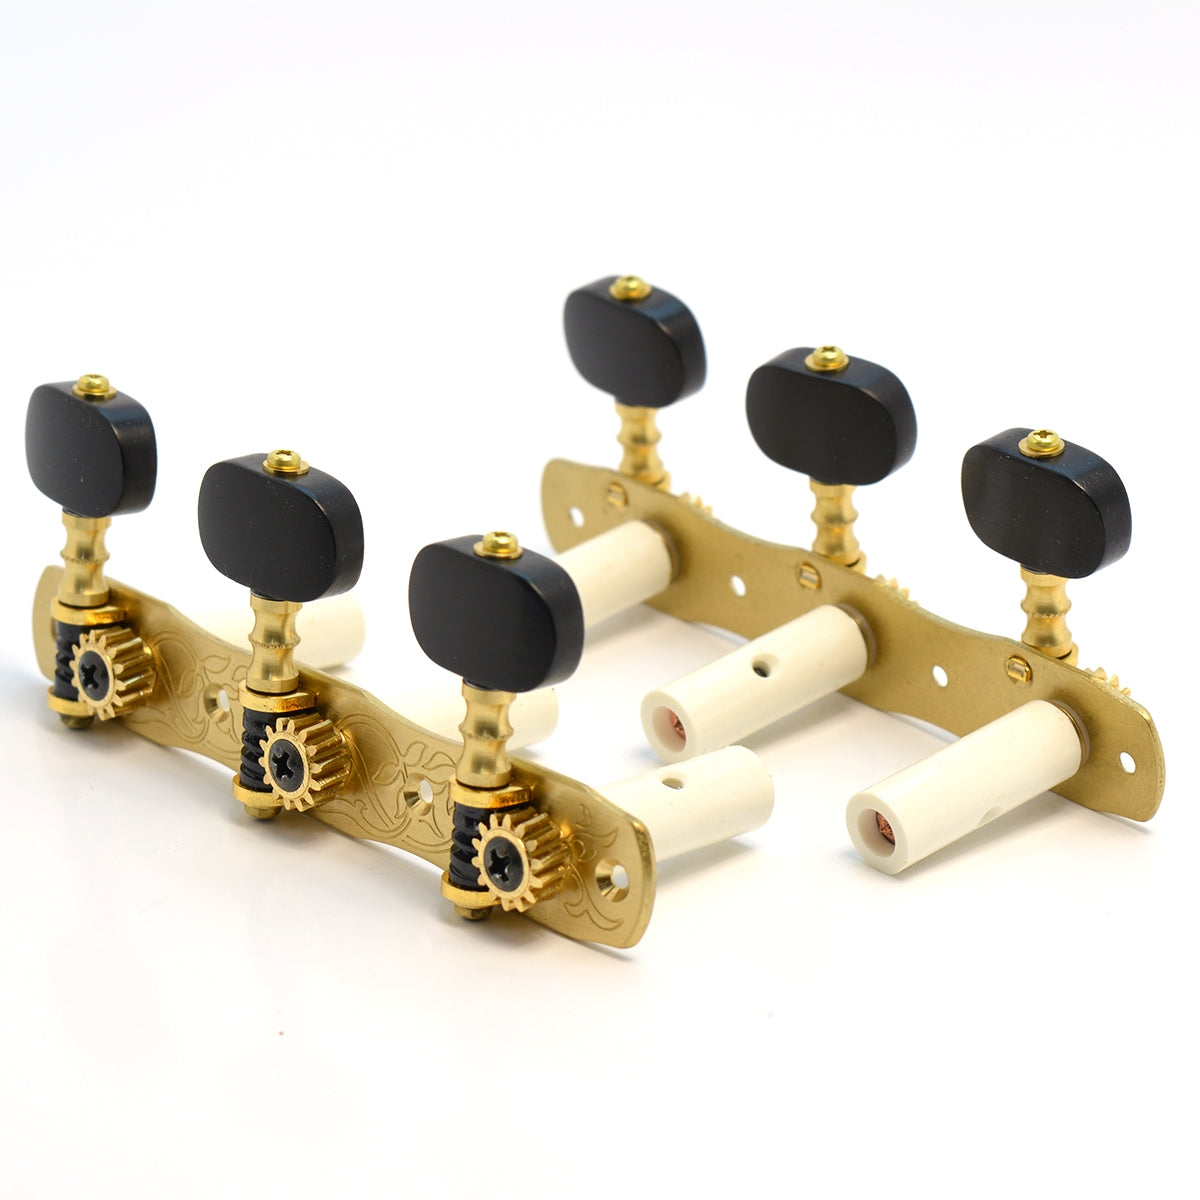 Gotoh Classical Tuner set, 35G1800ENX Brass Plate with black Buttons